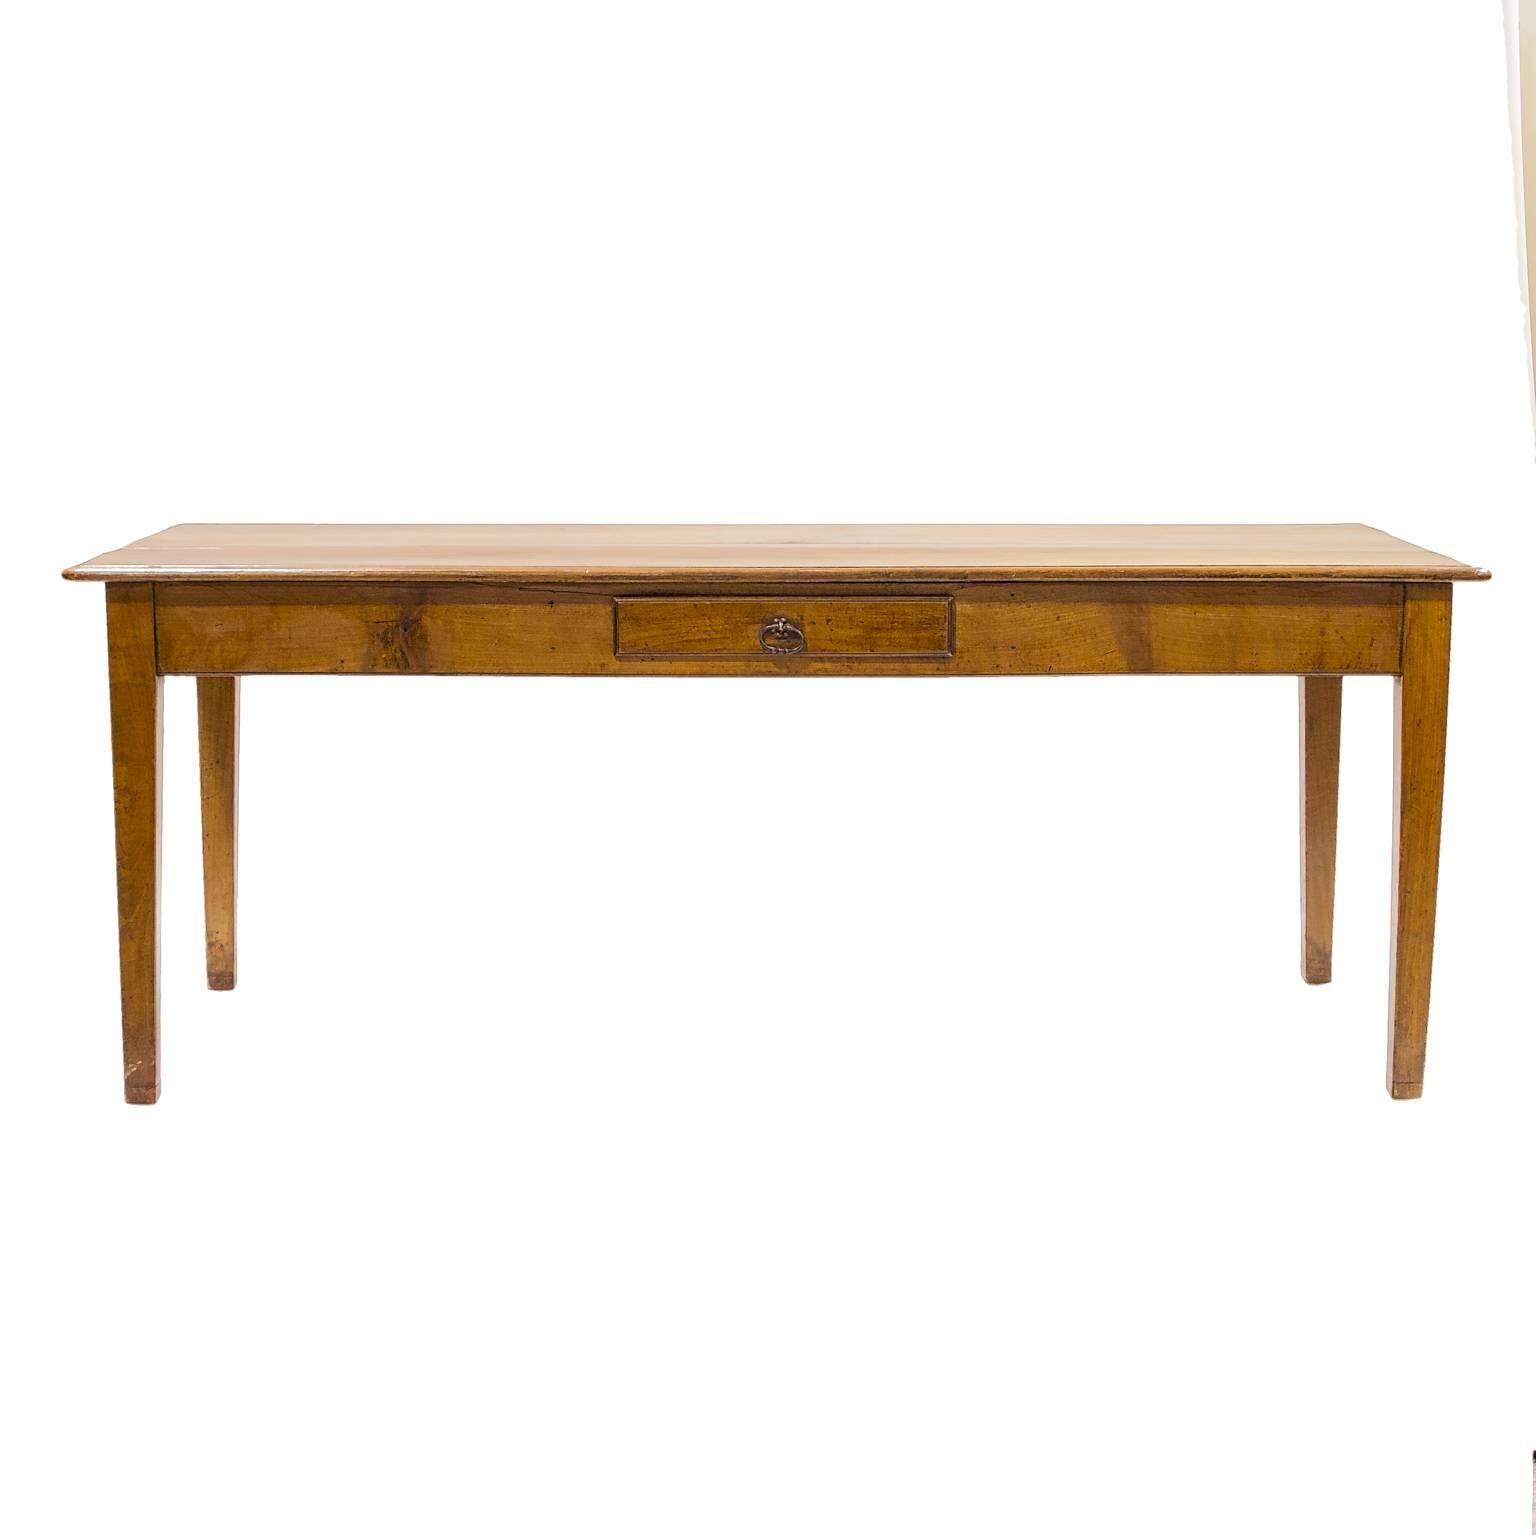 A simple but sturdy French country elmwood farm table. Nice tapered legs leading to an apron having a drawer. A beautiful choice of grained elmwood selected as the top. A mix of colors developed through time, makes it a pleasure to see everyday. A